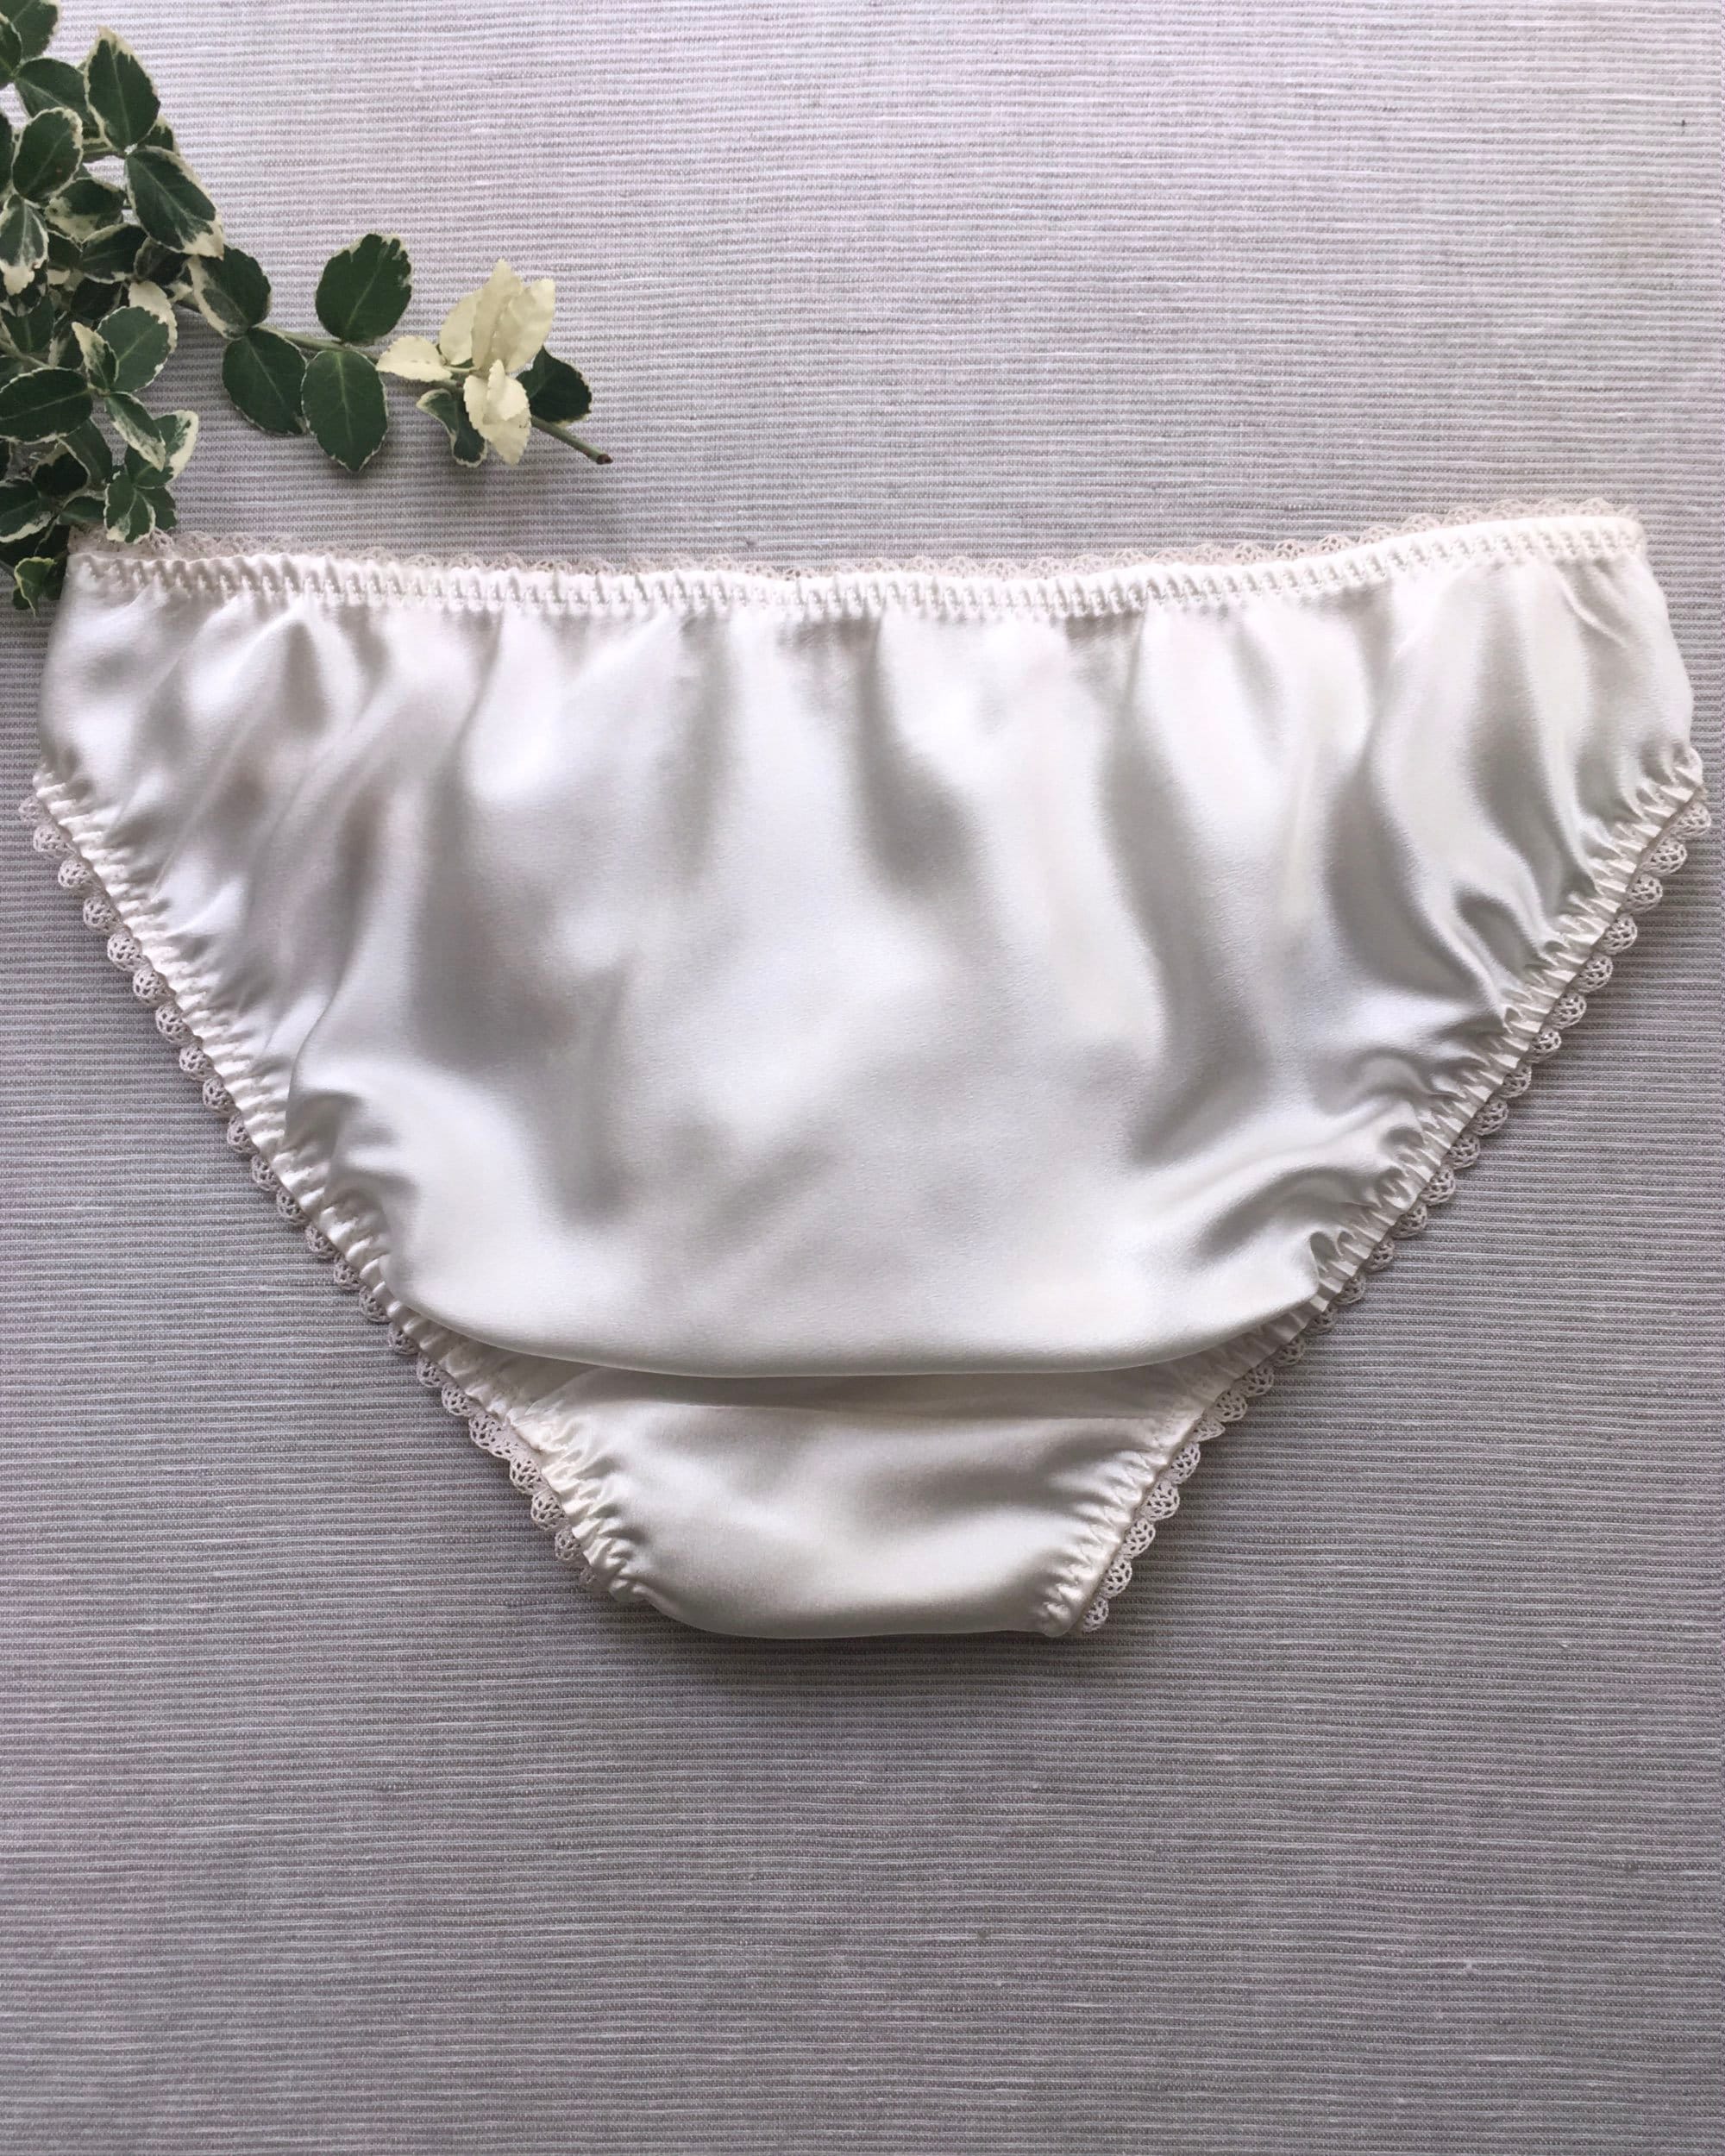 Womens Satin Panties Gift Box, Ivory Silk Knickers, Low Rise Briefs, White  Bridal Lingerie, Underwear Gift for Her, Unique Wedding Gift -  Canada